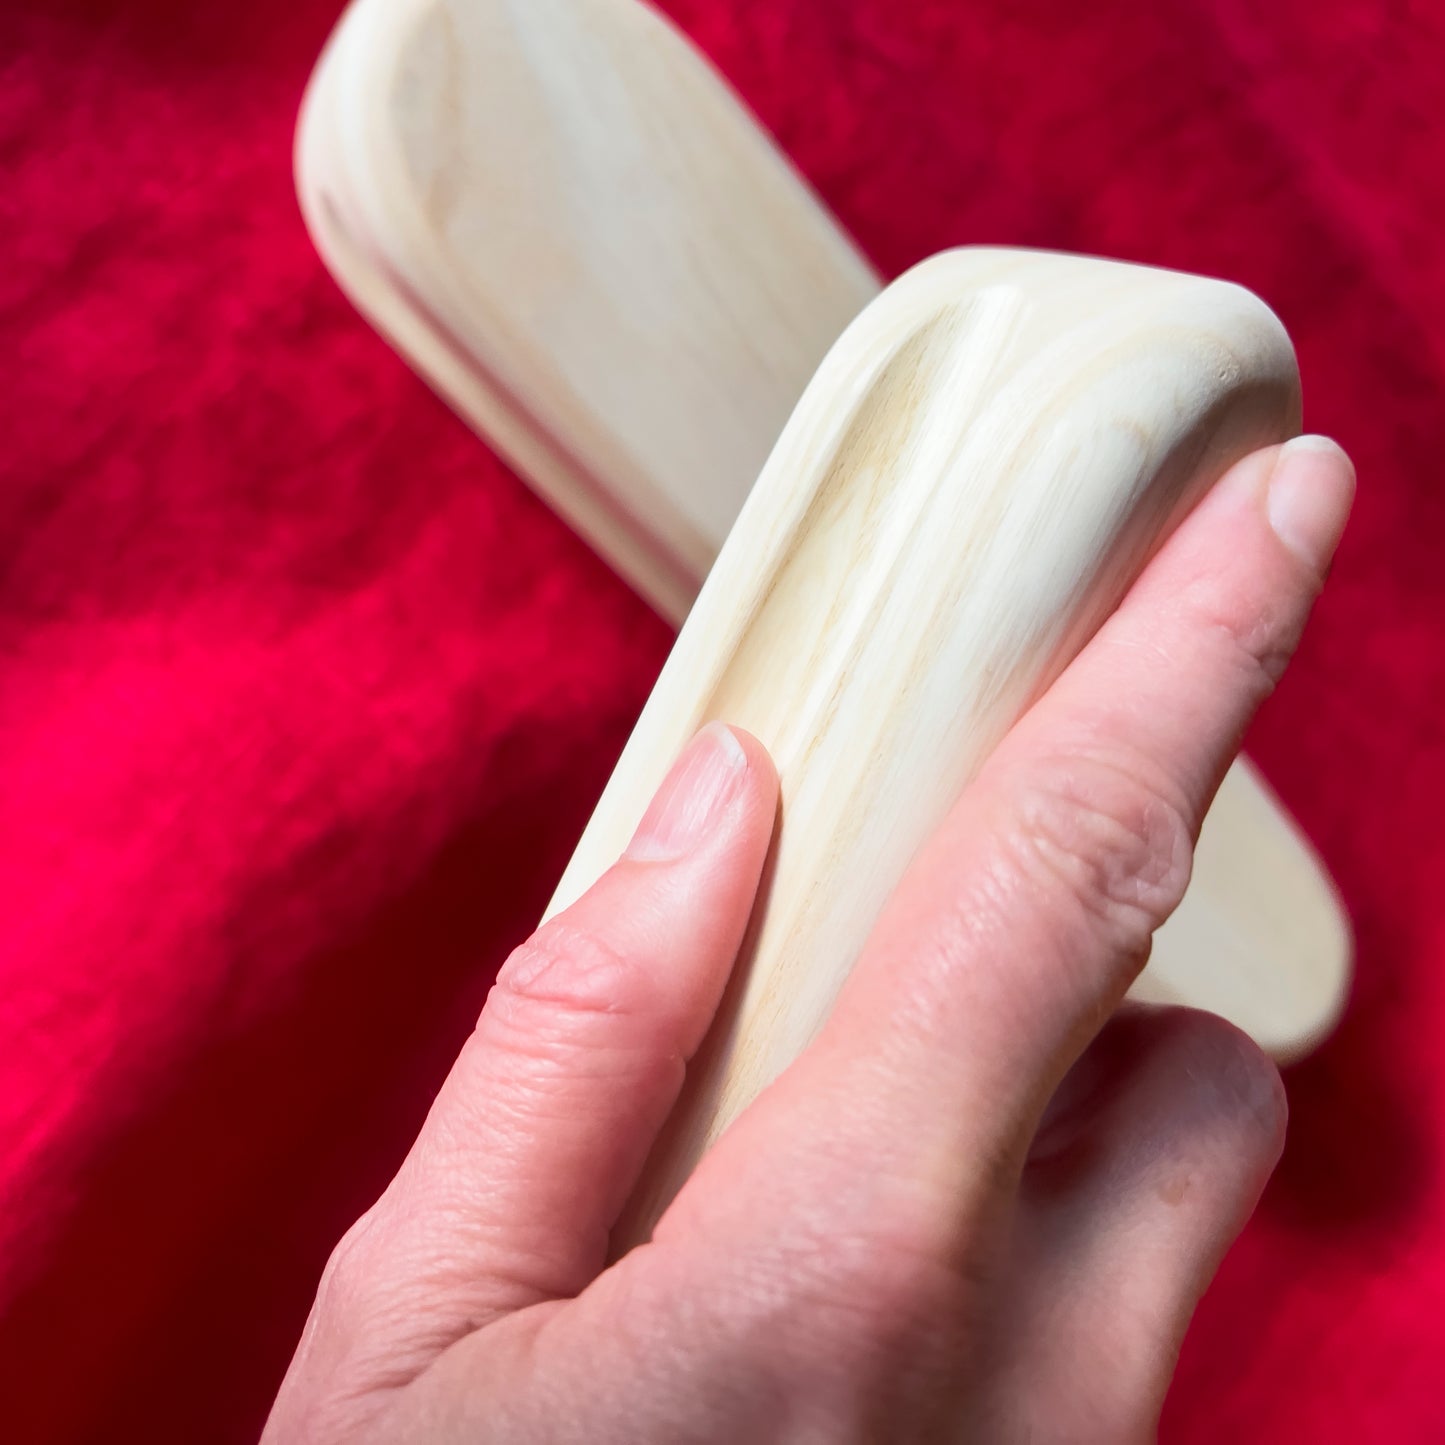 Tailor's clapper hand-crafted from Ash